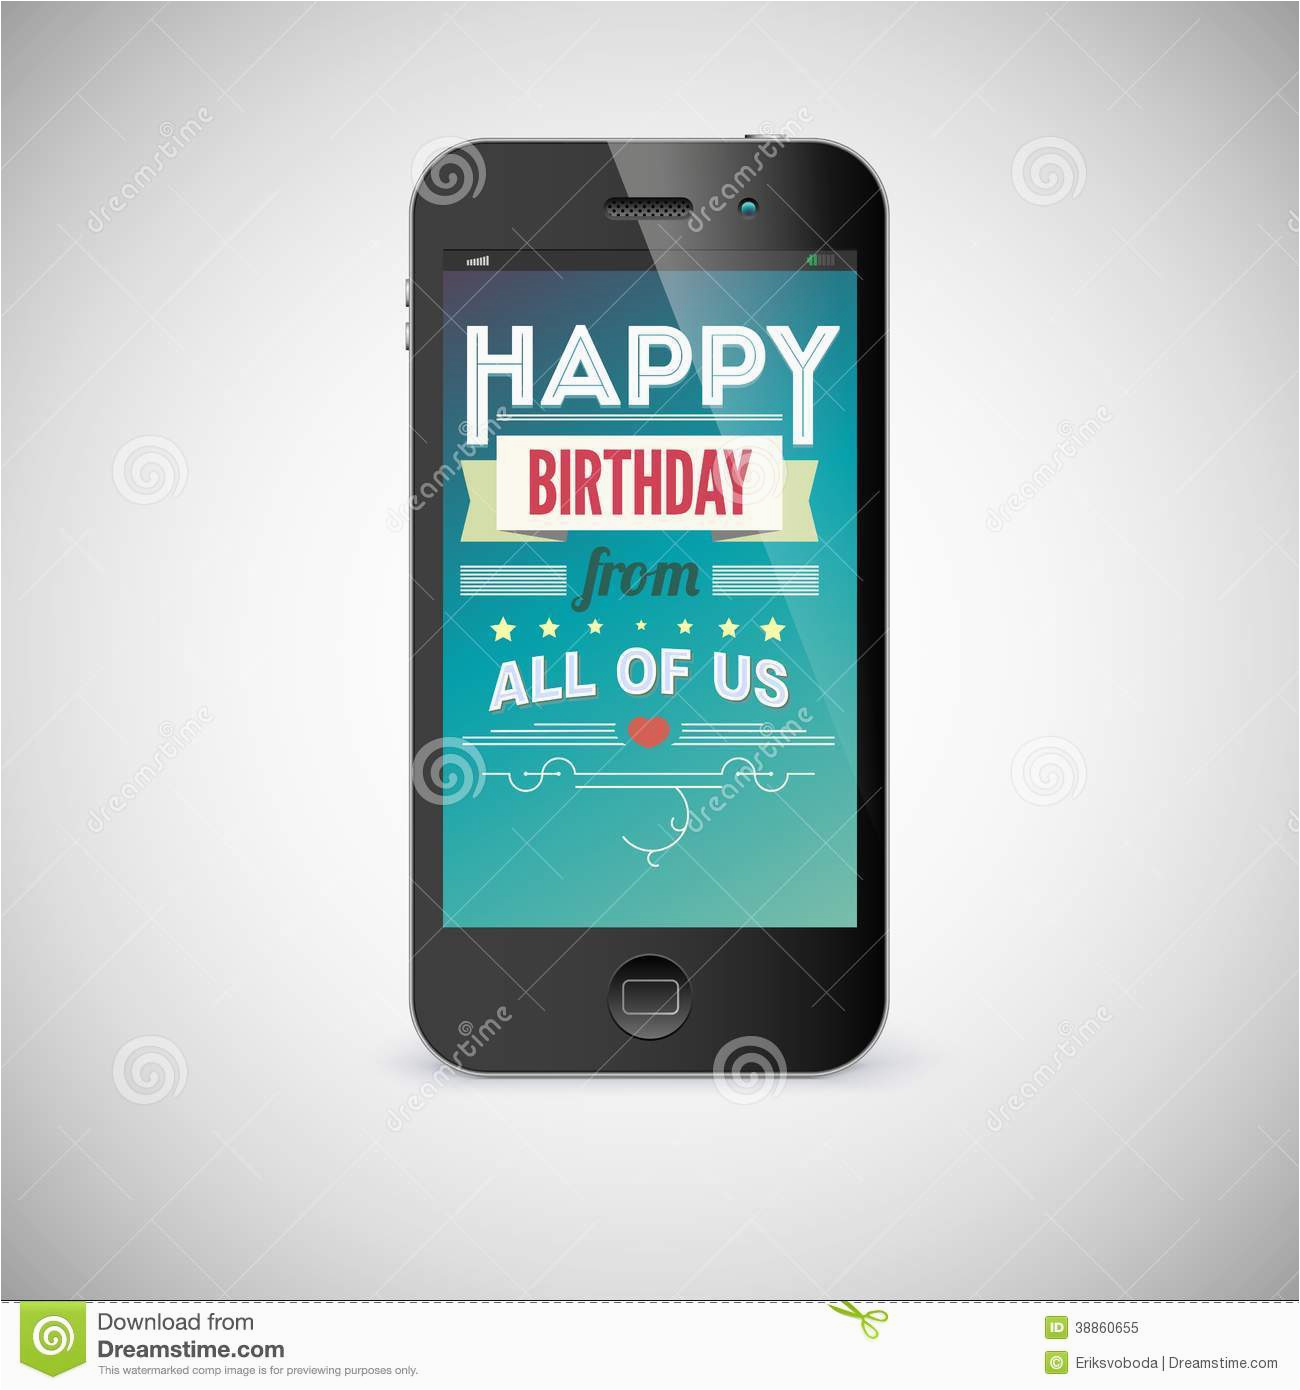 royalty free stock photo birthday greeting card screen mobile phone image38860655